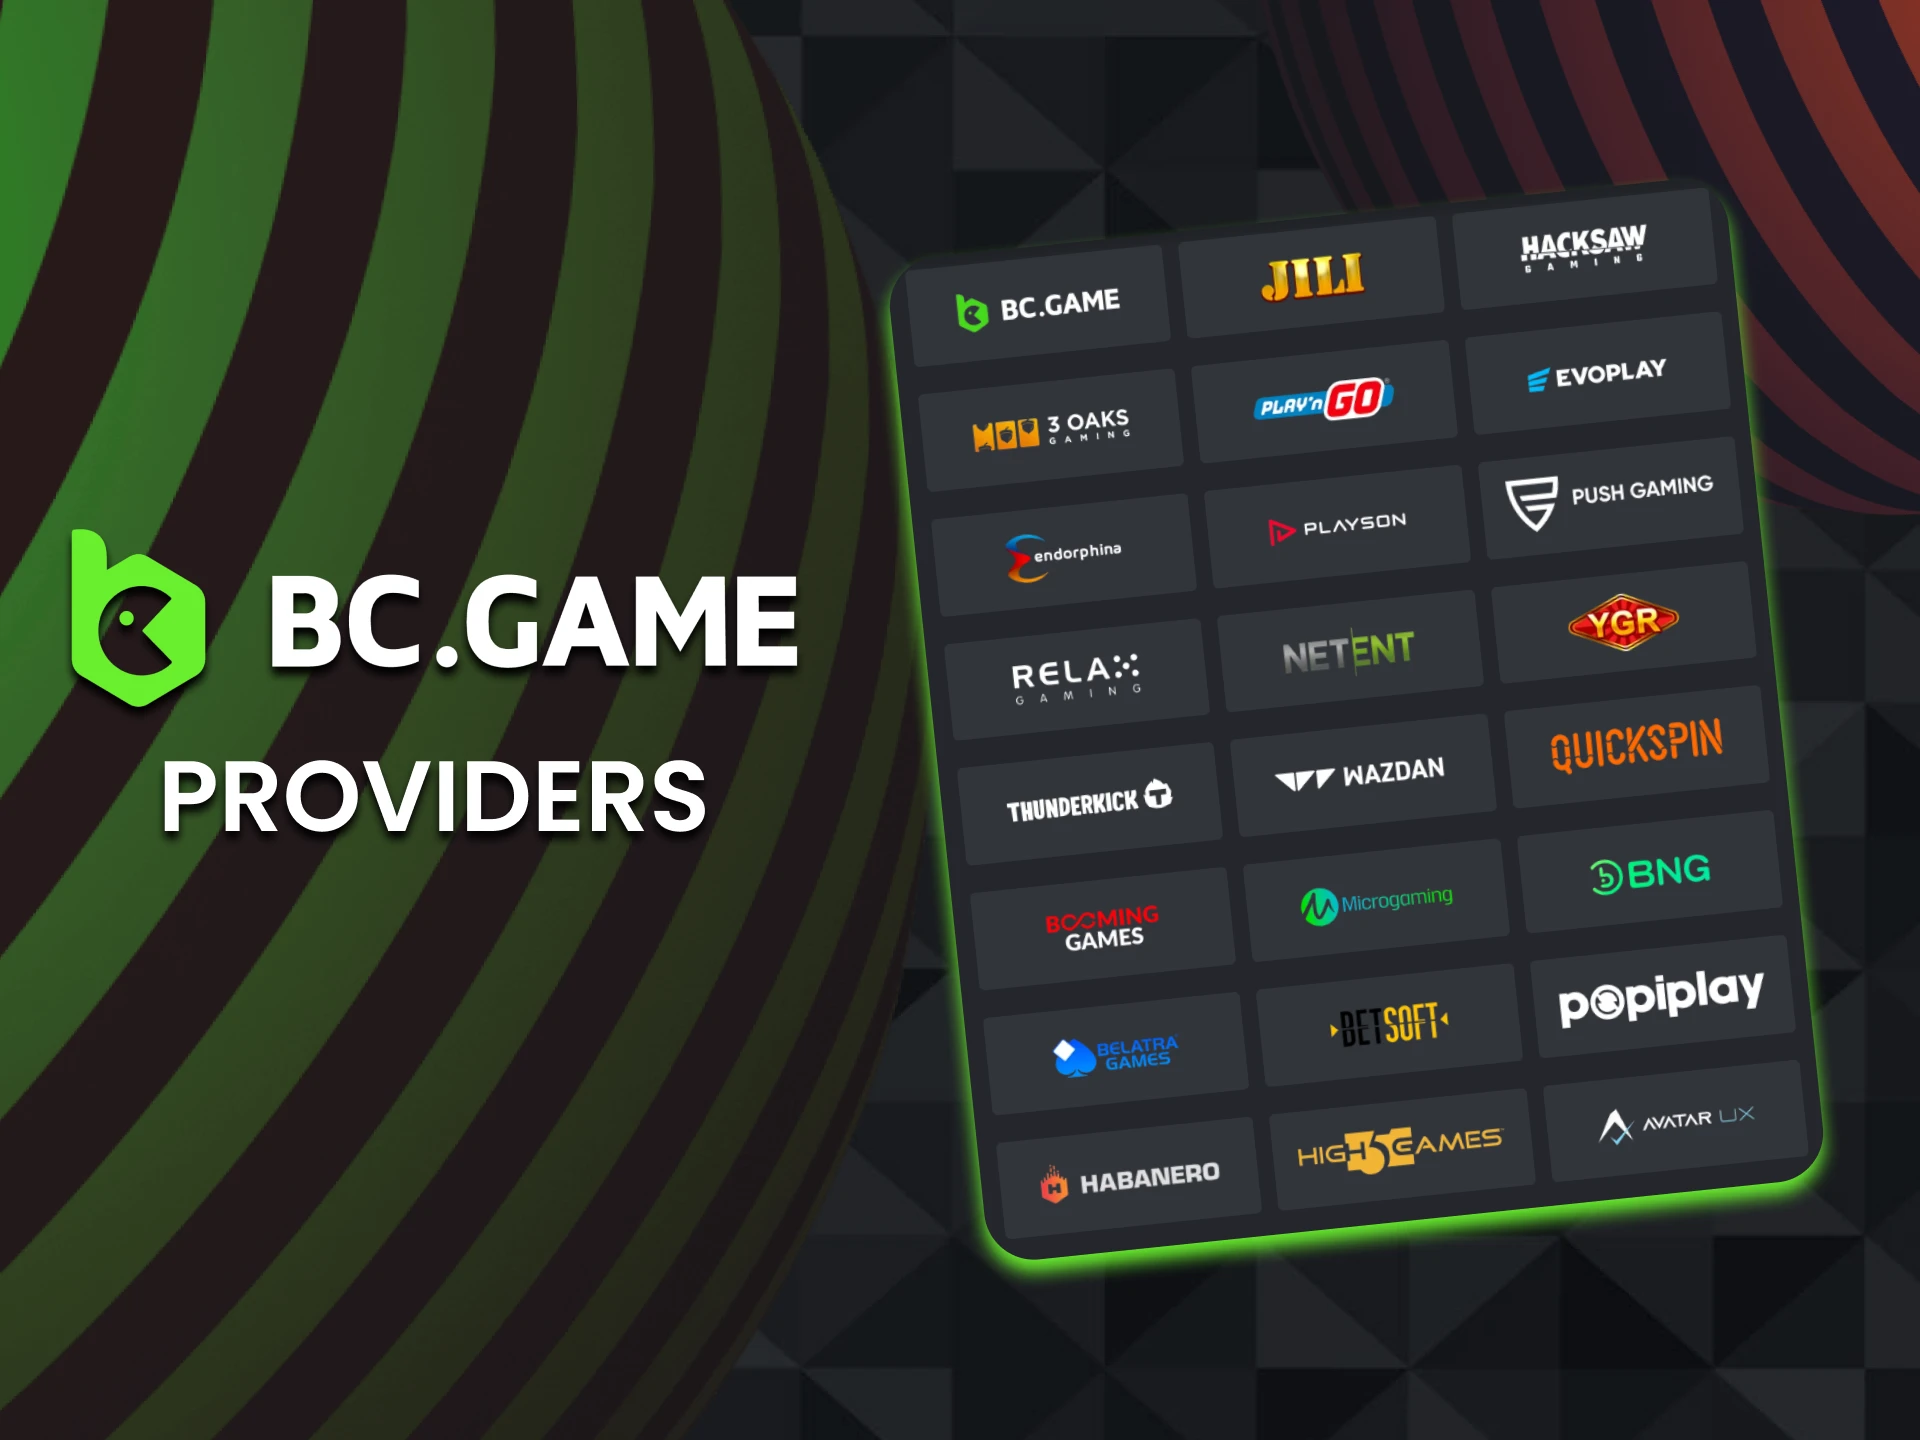 Find out which baccarat providers are available on BC Game.